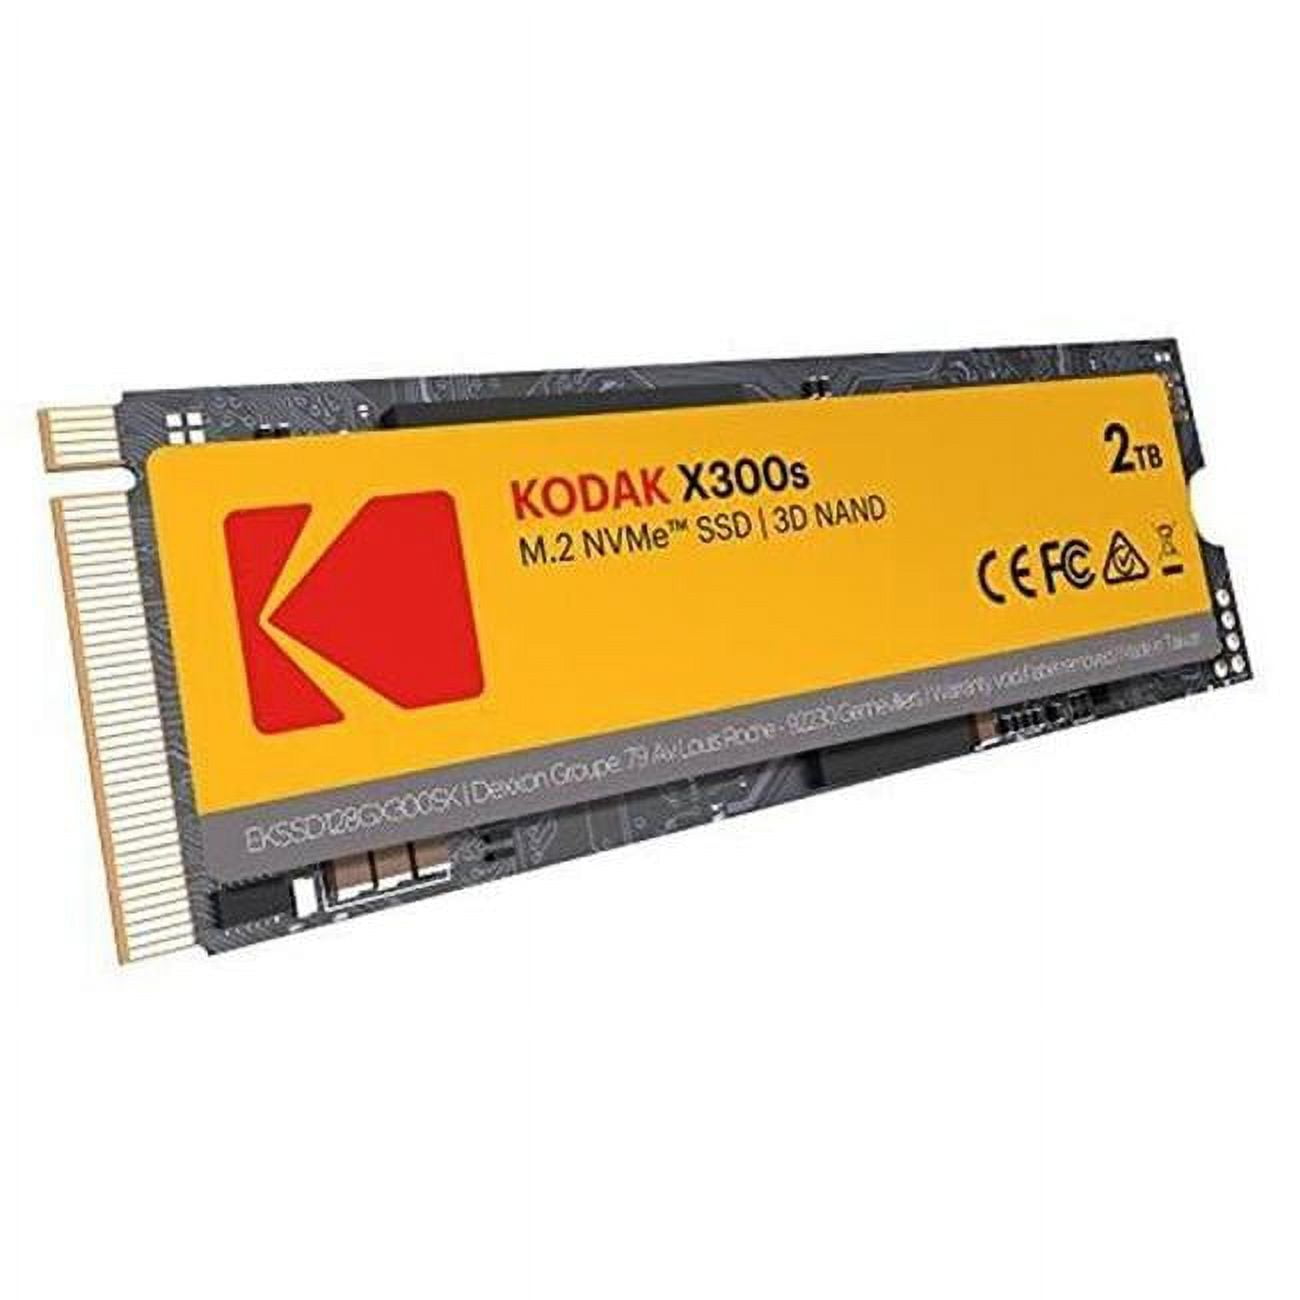 Picture of Kodak EKSSD2TX300SK M2 NVME PCIE 2TB Solid State Drive